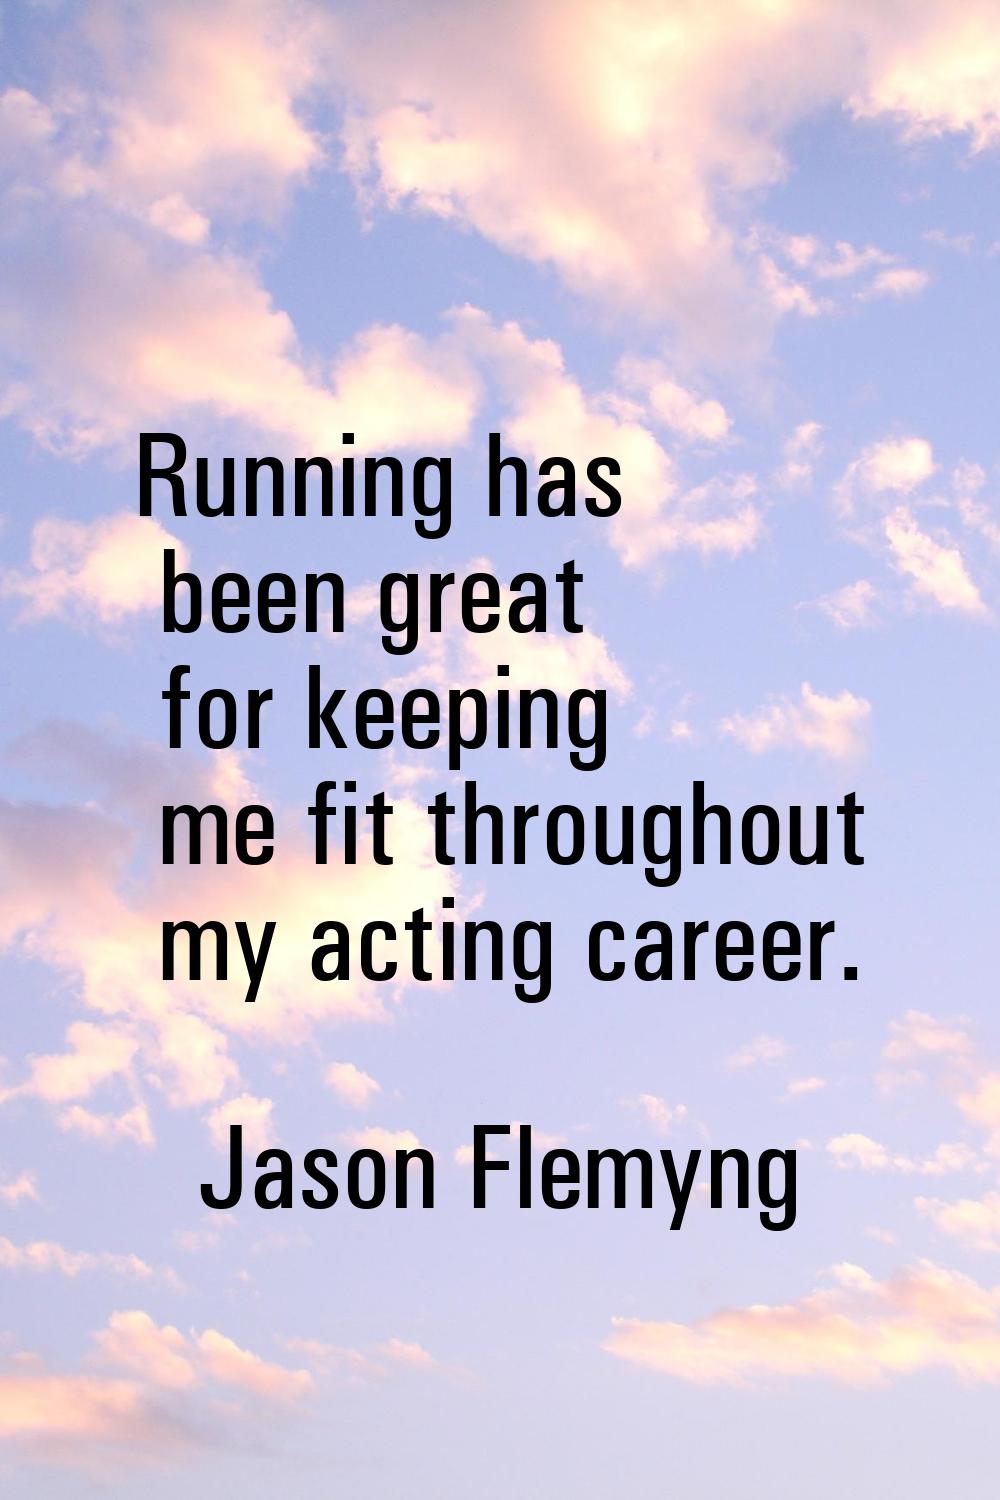 Running has been great for keeping me fit throughout my acting career.